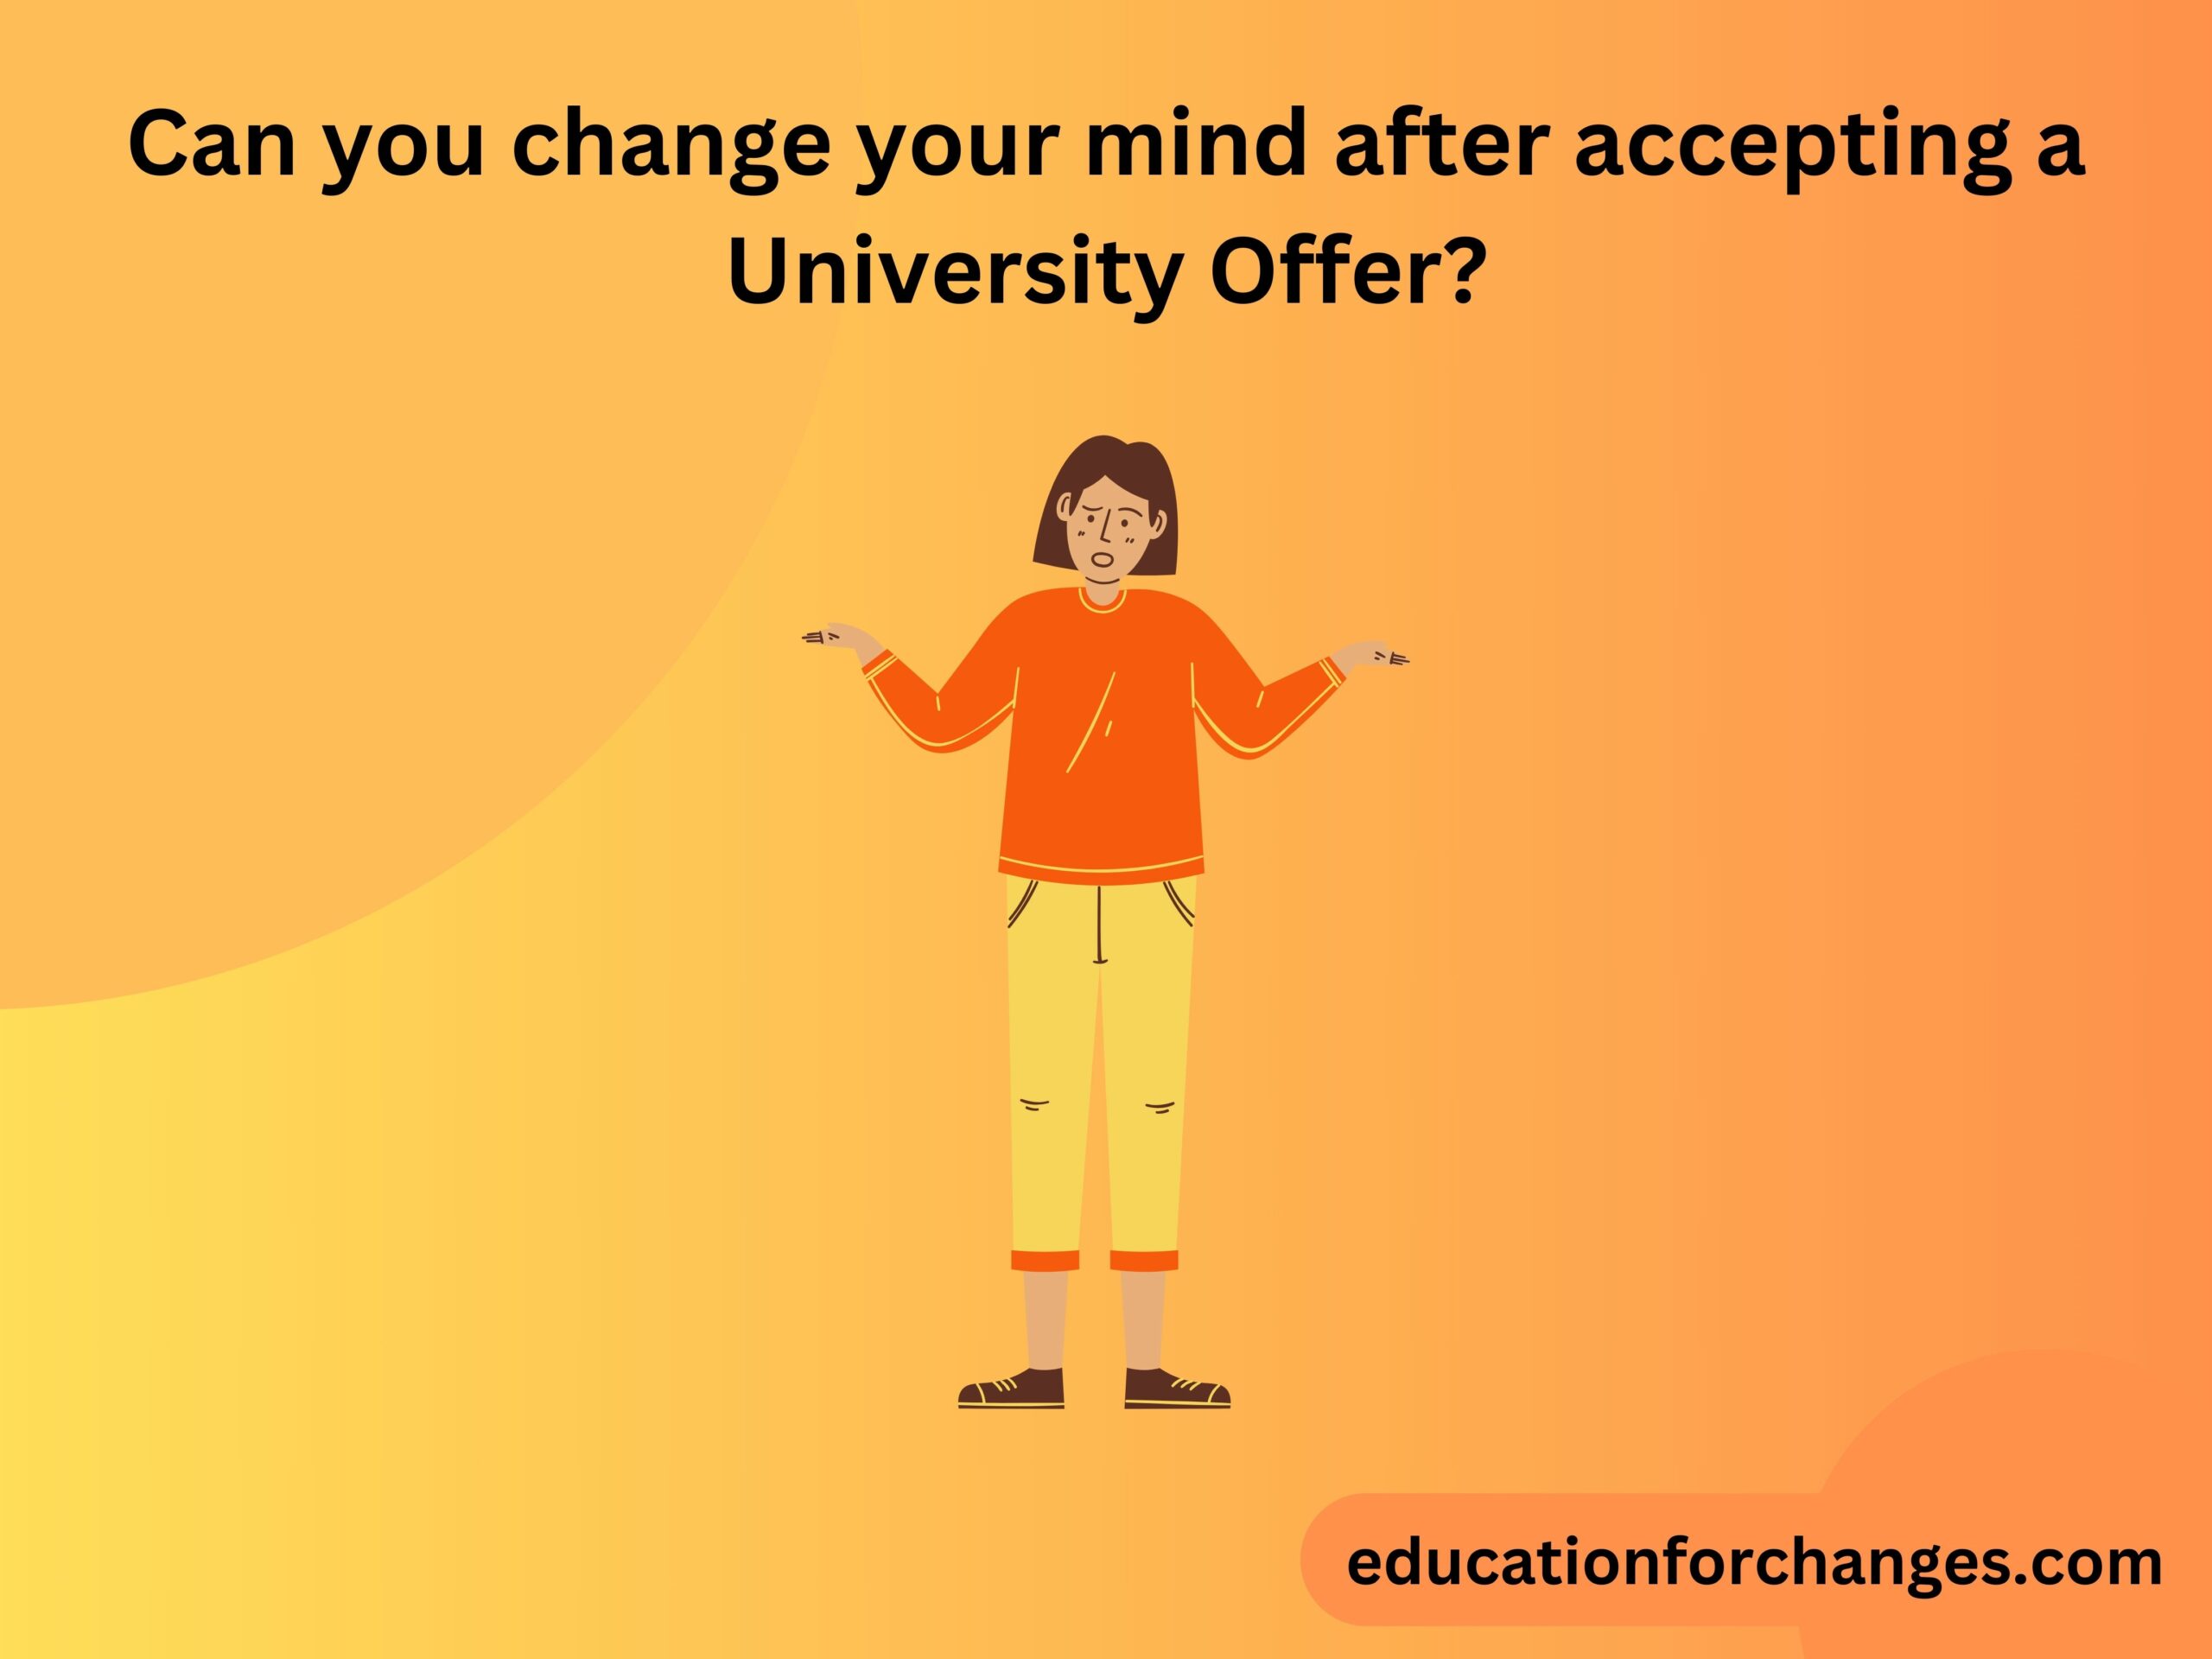 Can you change your mind after accepting a University Offer?